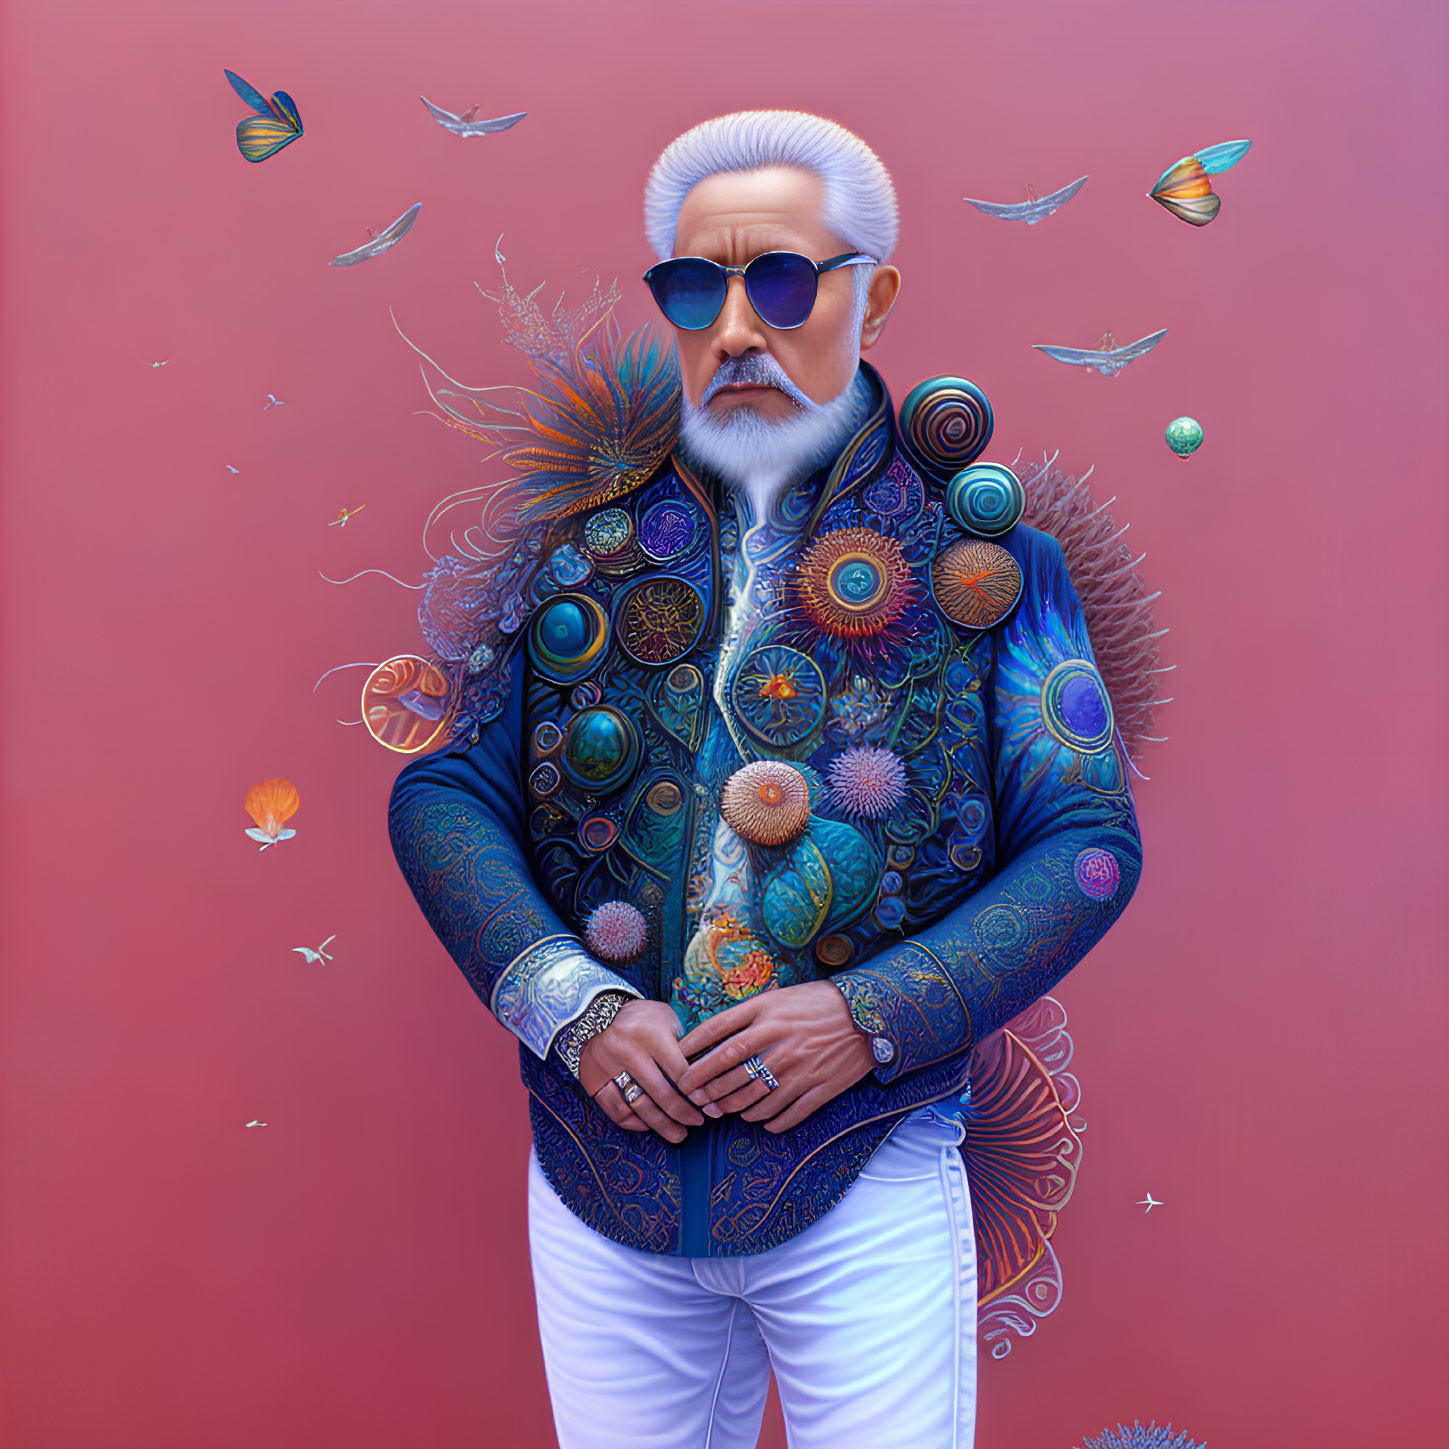 Elderly man in sunglasses and colorful jacket on red background